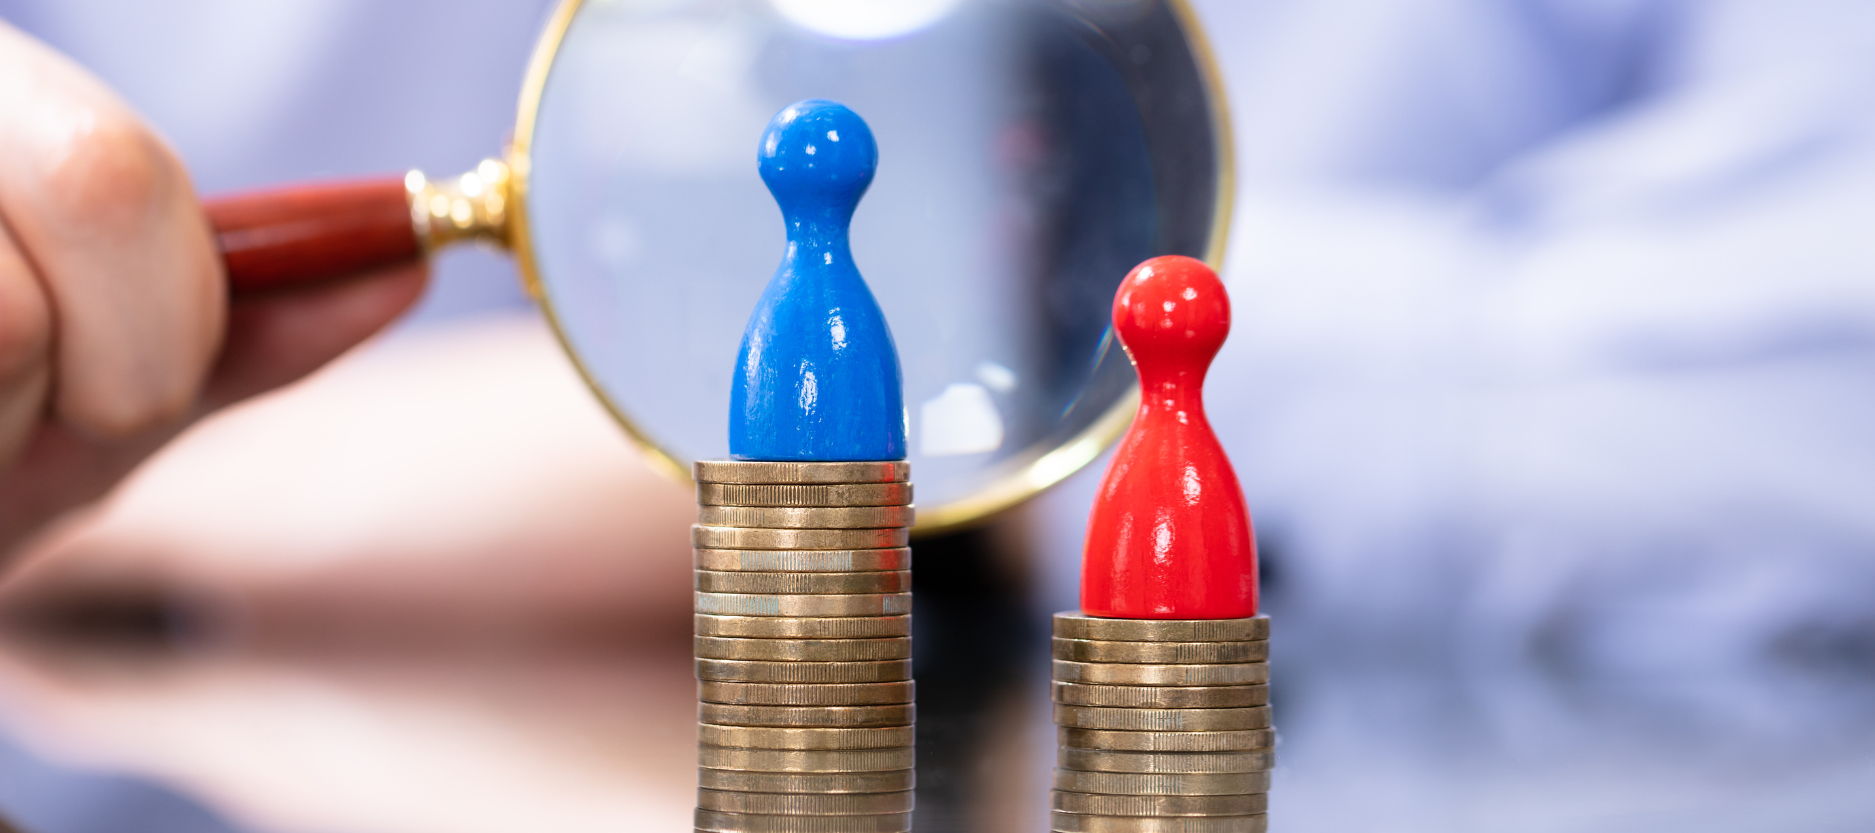 Unravelling The Gender Pay Gap   Insights For Both Employers And Candidates